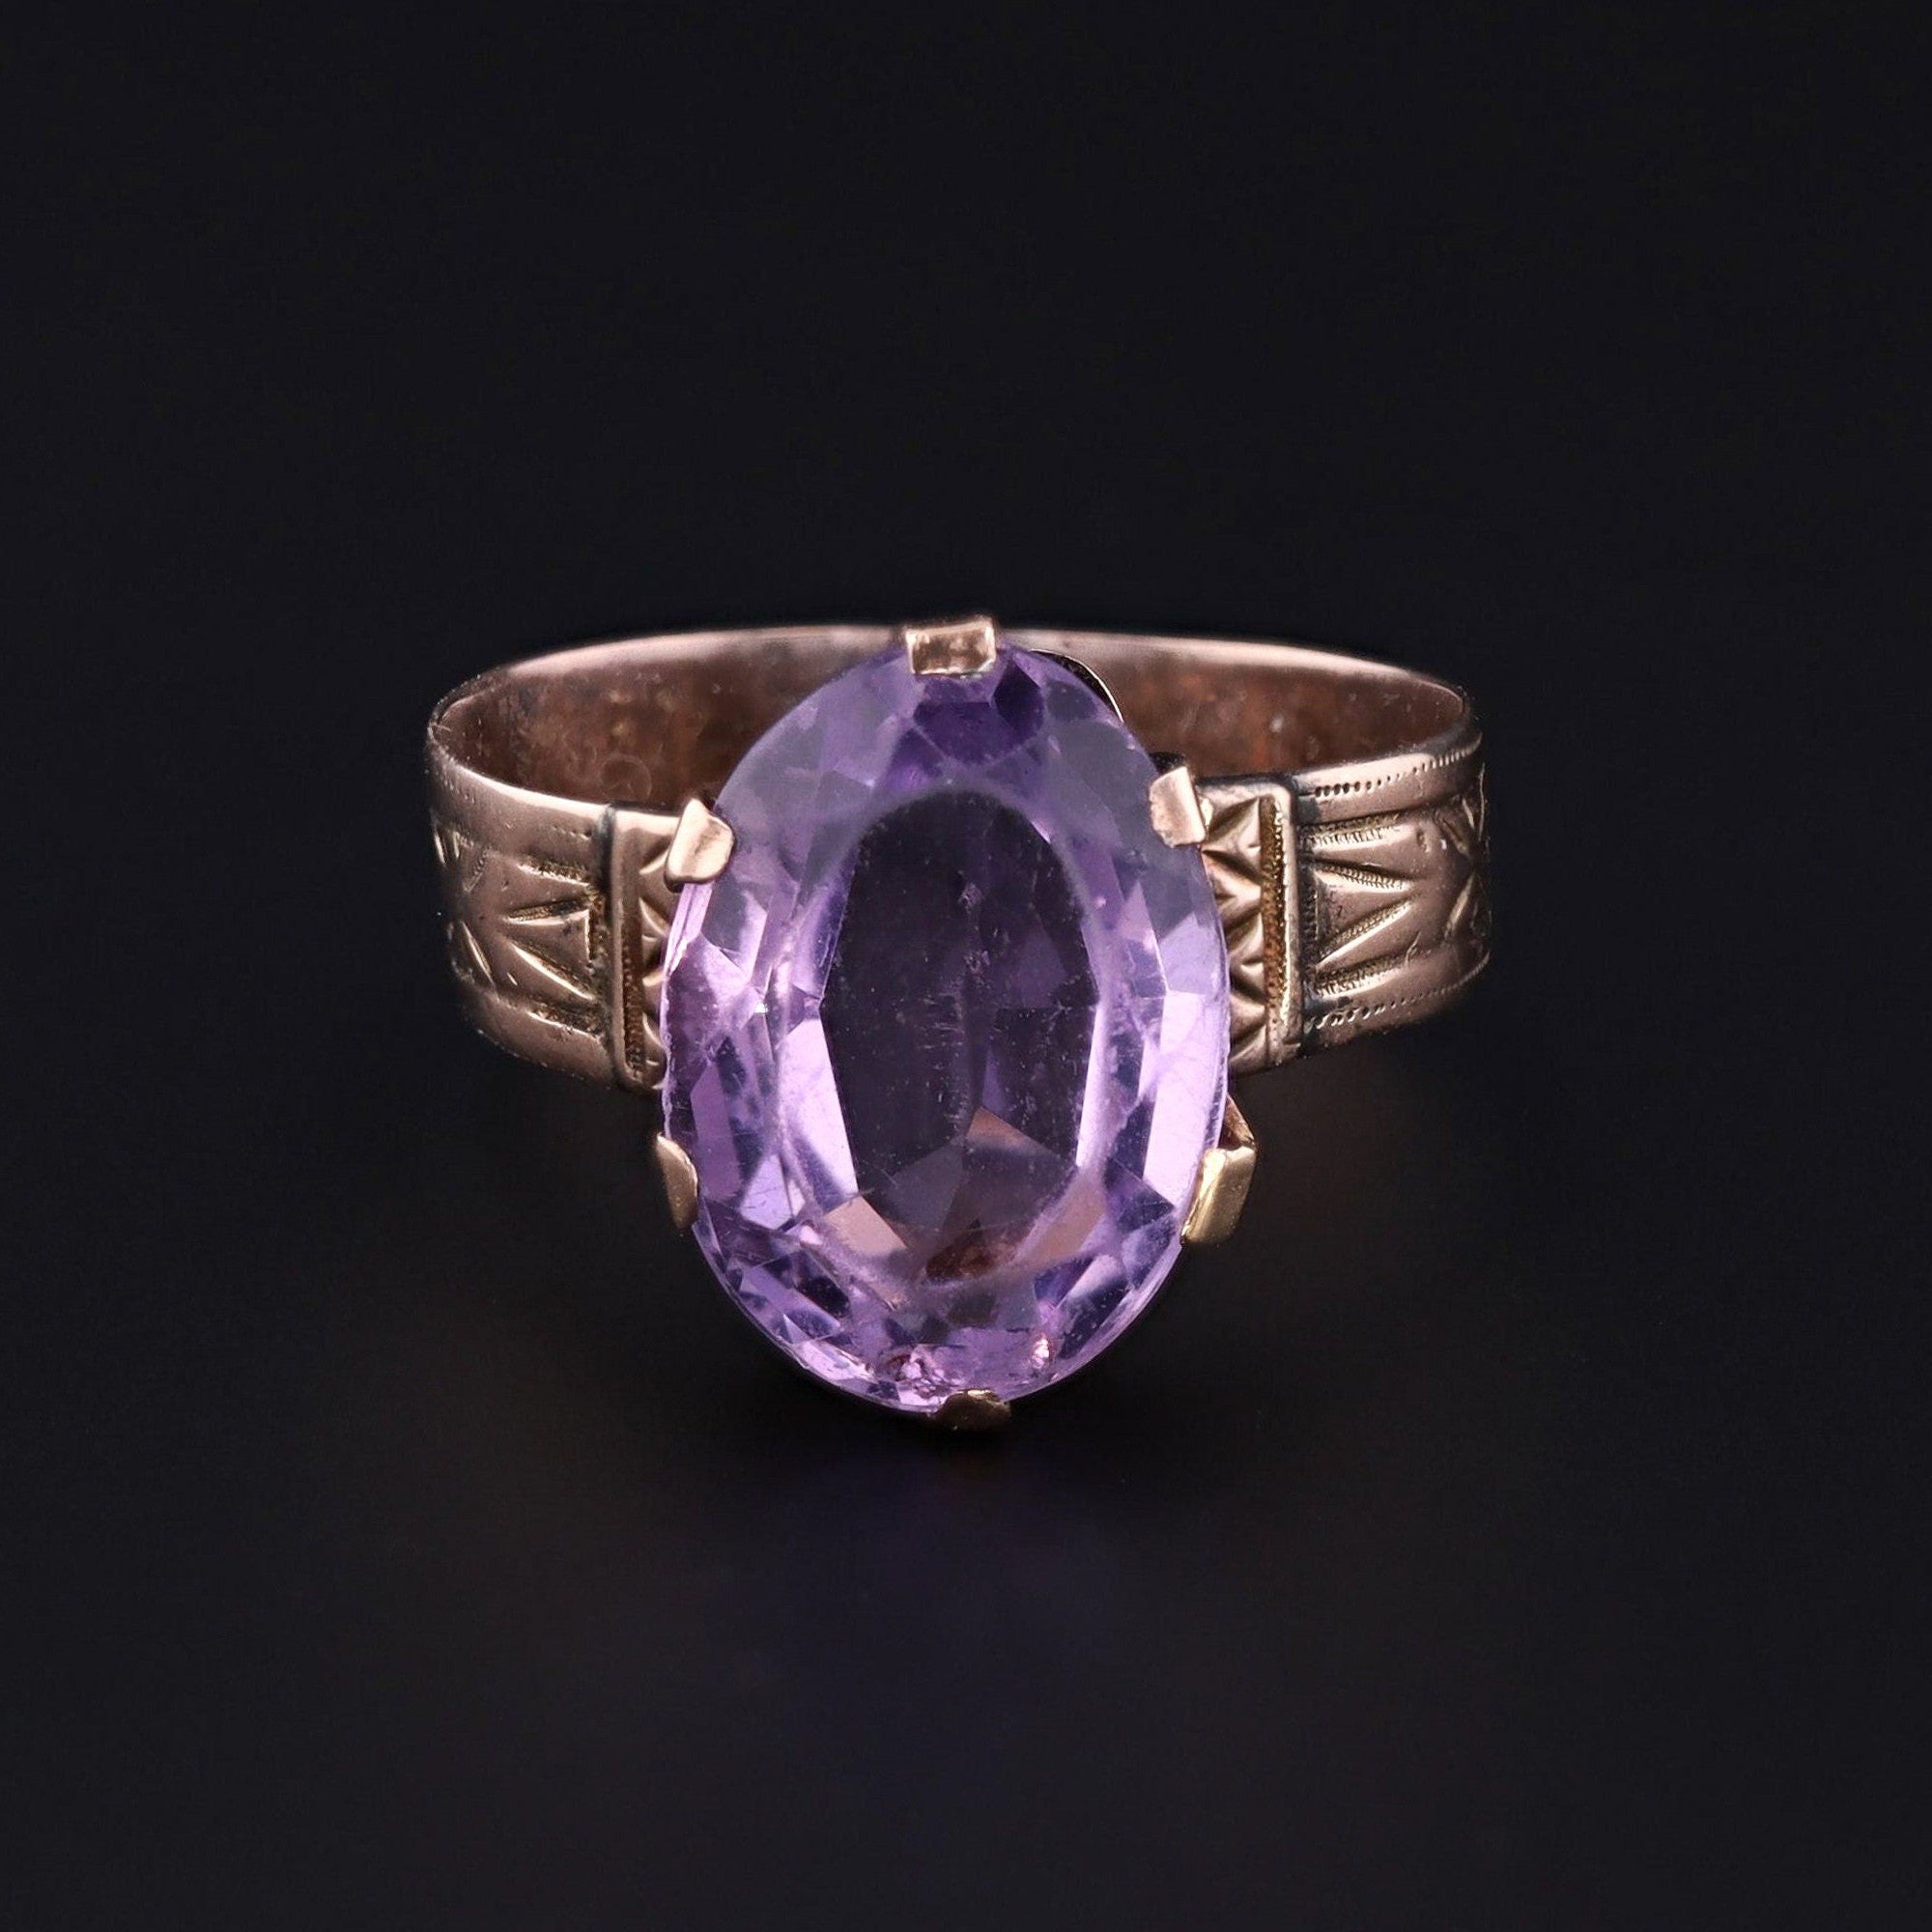 Antique Amethyst Ring of 9ct Gold